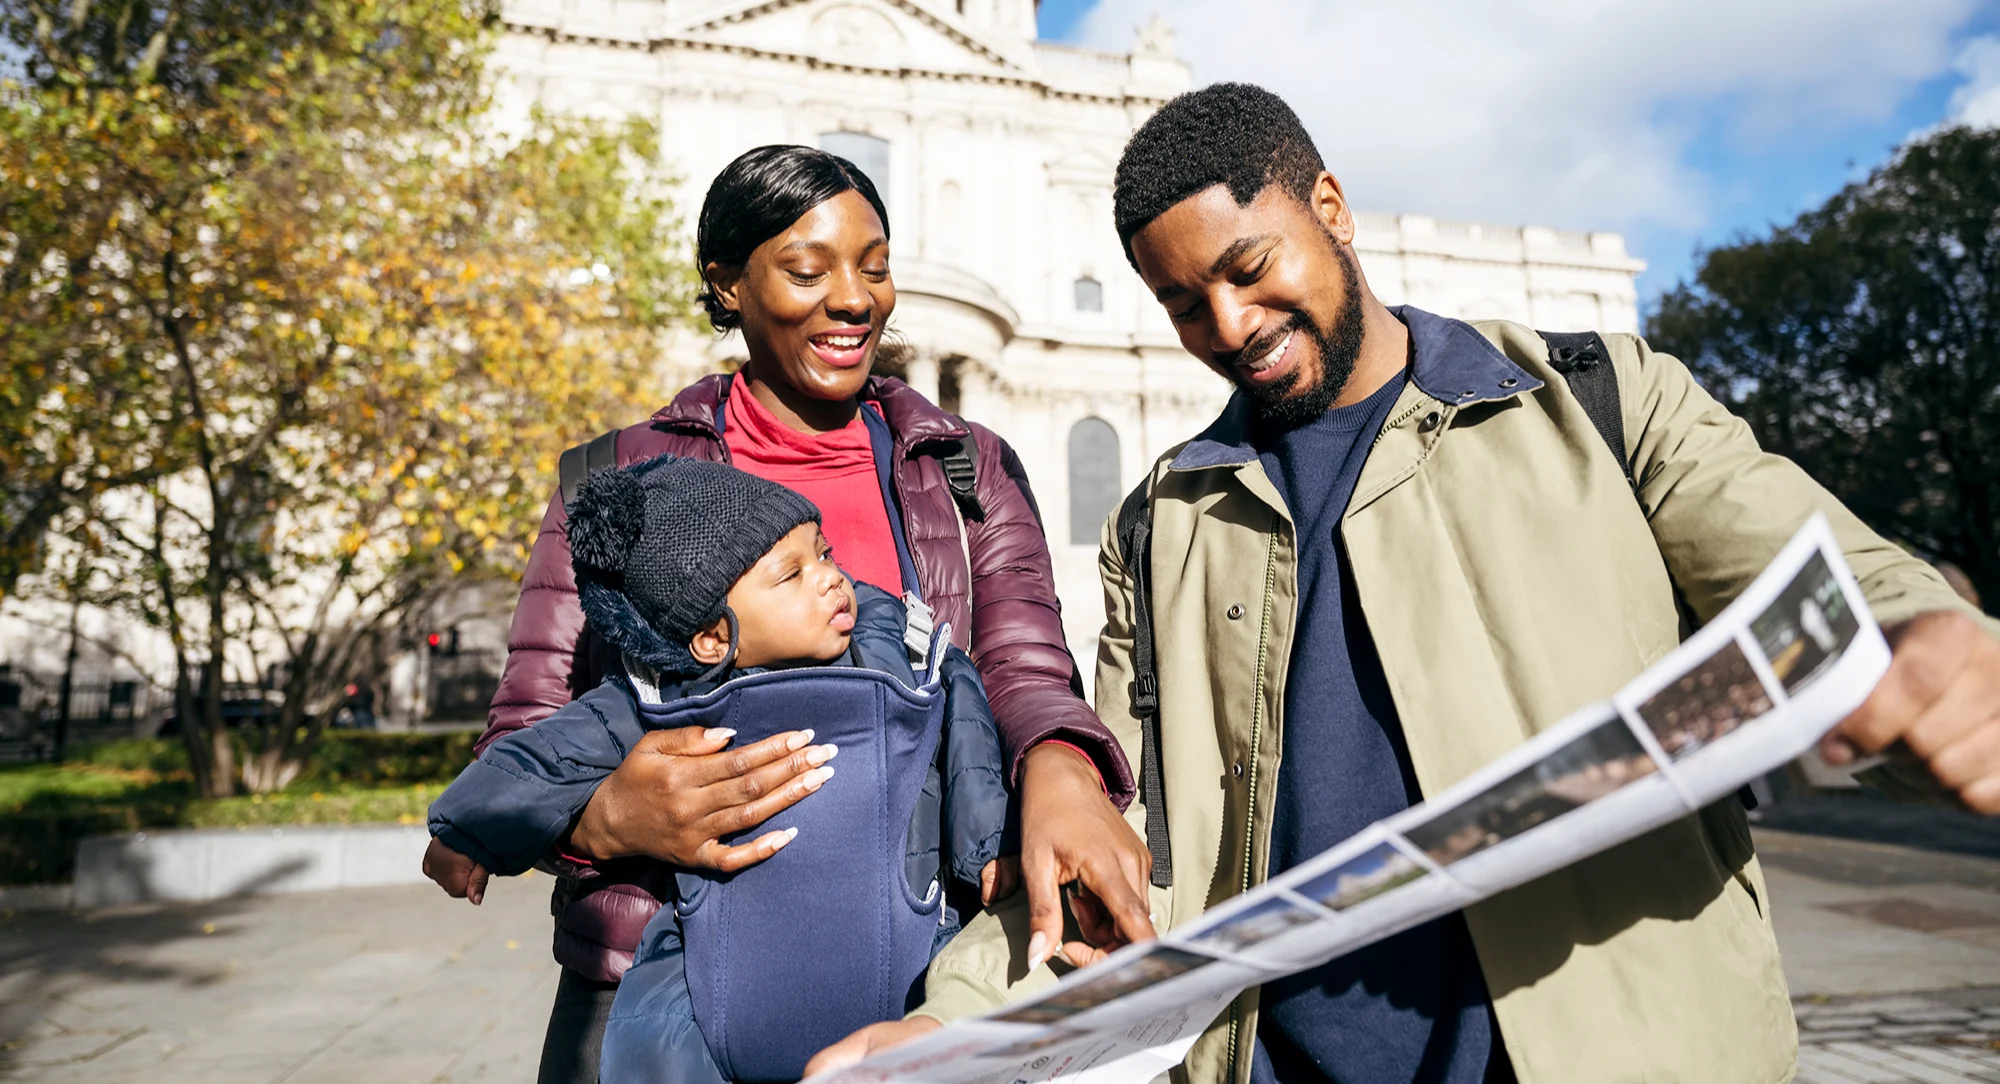 A Black woman who is wearing a baby in a sling stands next to a Black man, they are both looking at a fold-out leaflet and smiling.